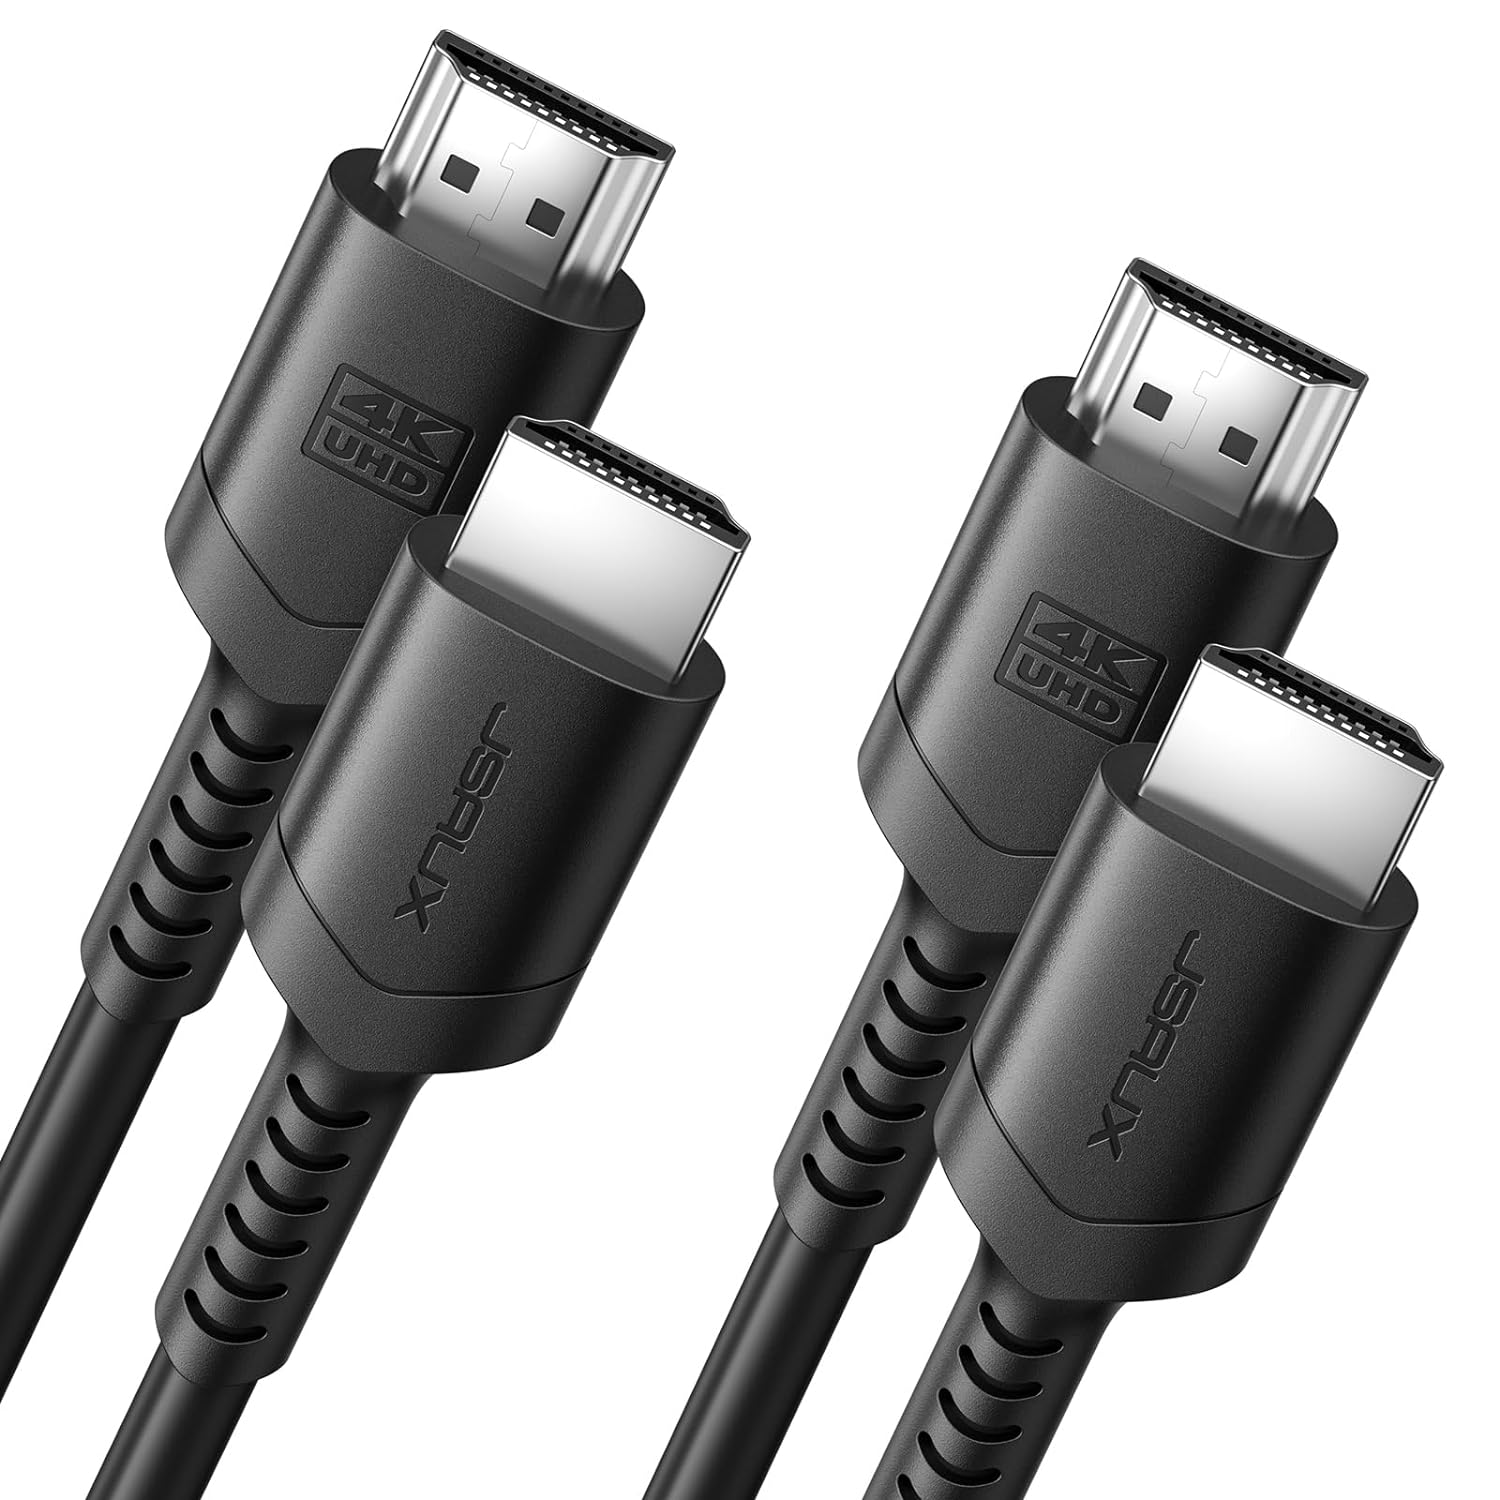 2-Pack 3.3' JSAUX 4K 18Gbps HDMI 2.0 Cable $6.50 + Free Shipping w/ Prime